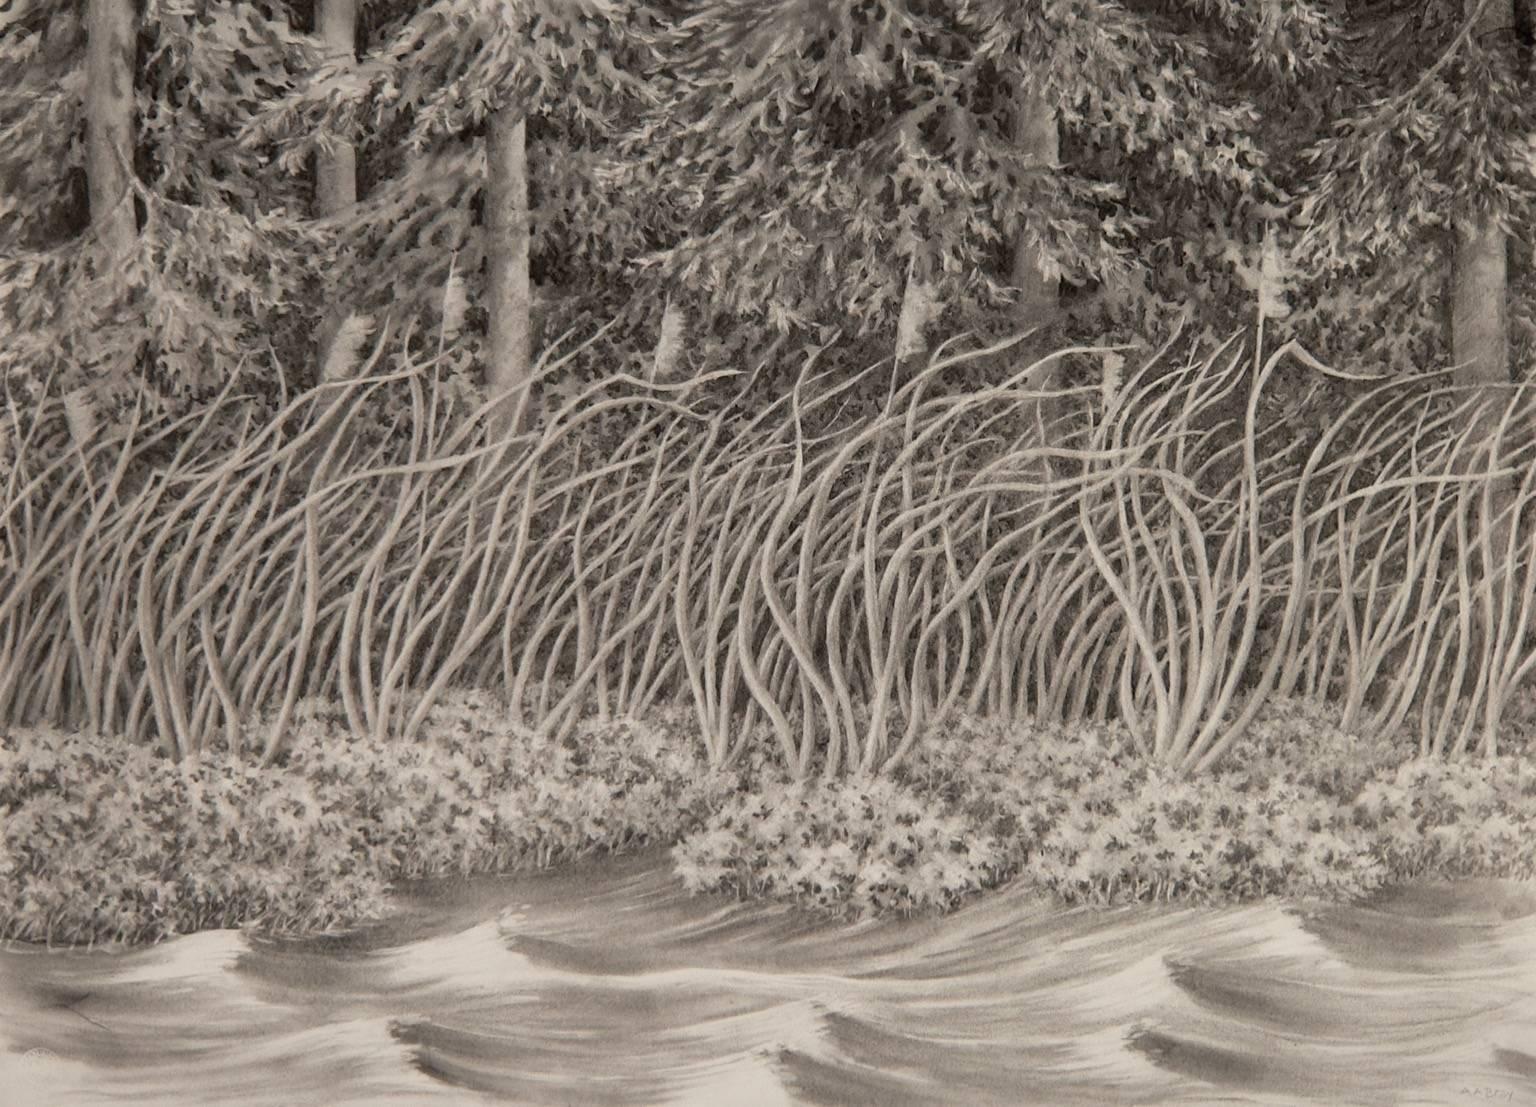 In Four Things in the Wind, Bray draws in charcoal and Conté crayon to create the shore of a river on a windy day. The artist utilizes his bendy, rhythmic style to animate the elements of the scene, in particular the rivergrass and the water